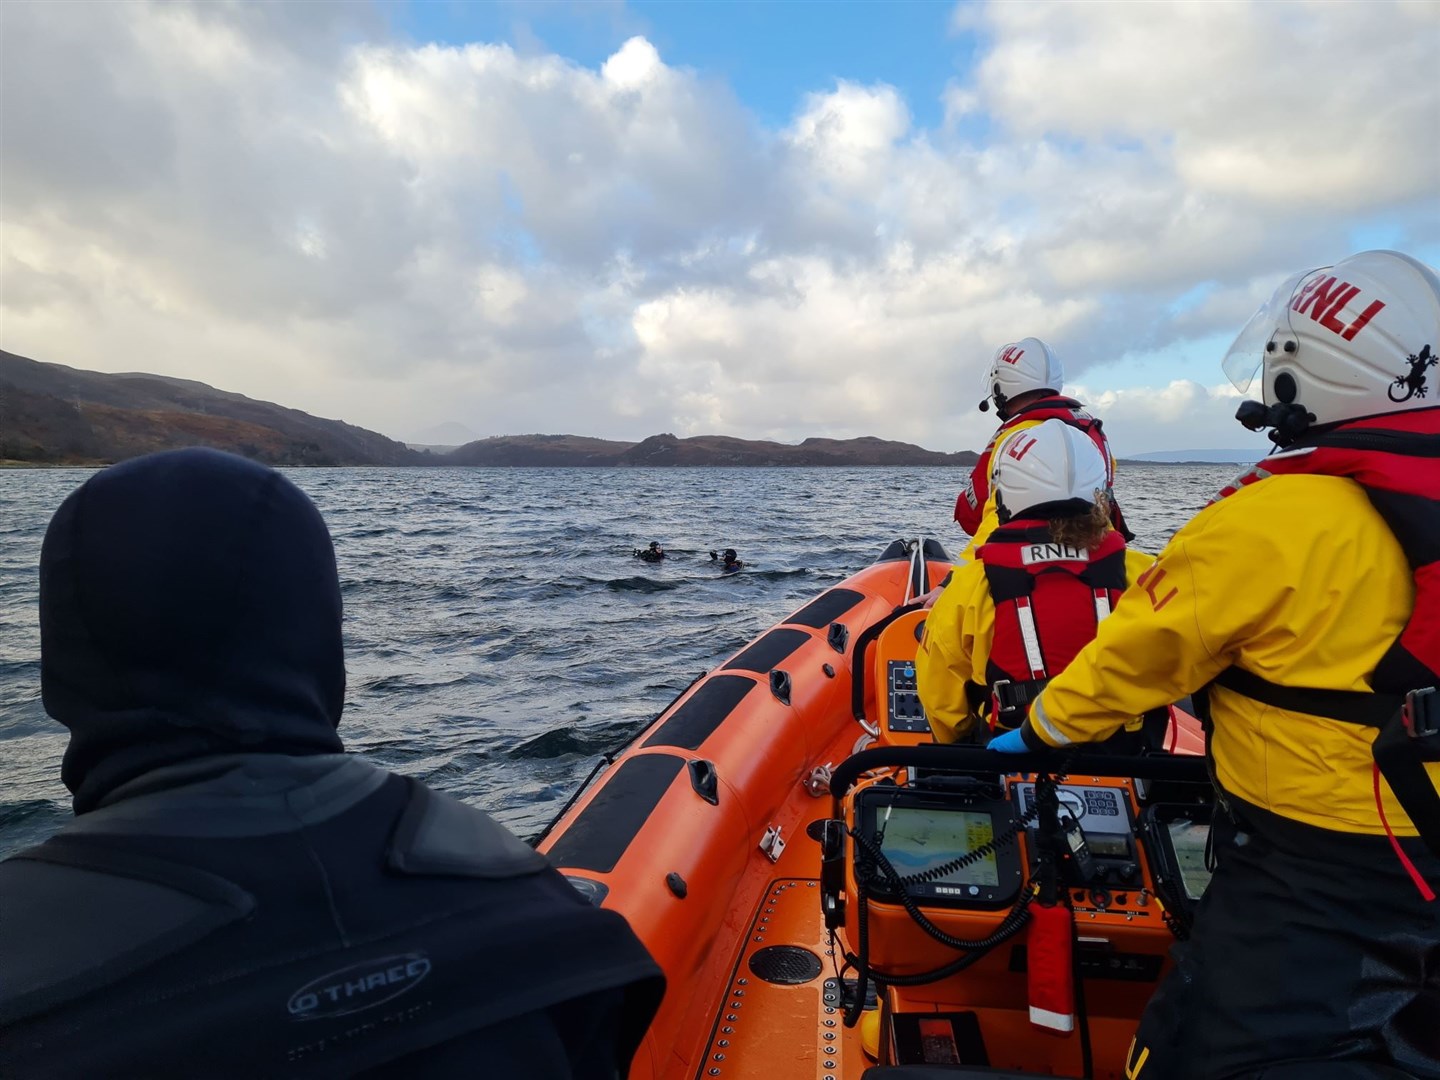 Divers in the water. Picture: Kyle RNLI